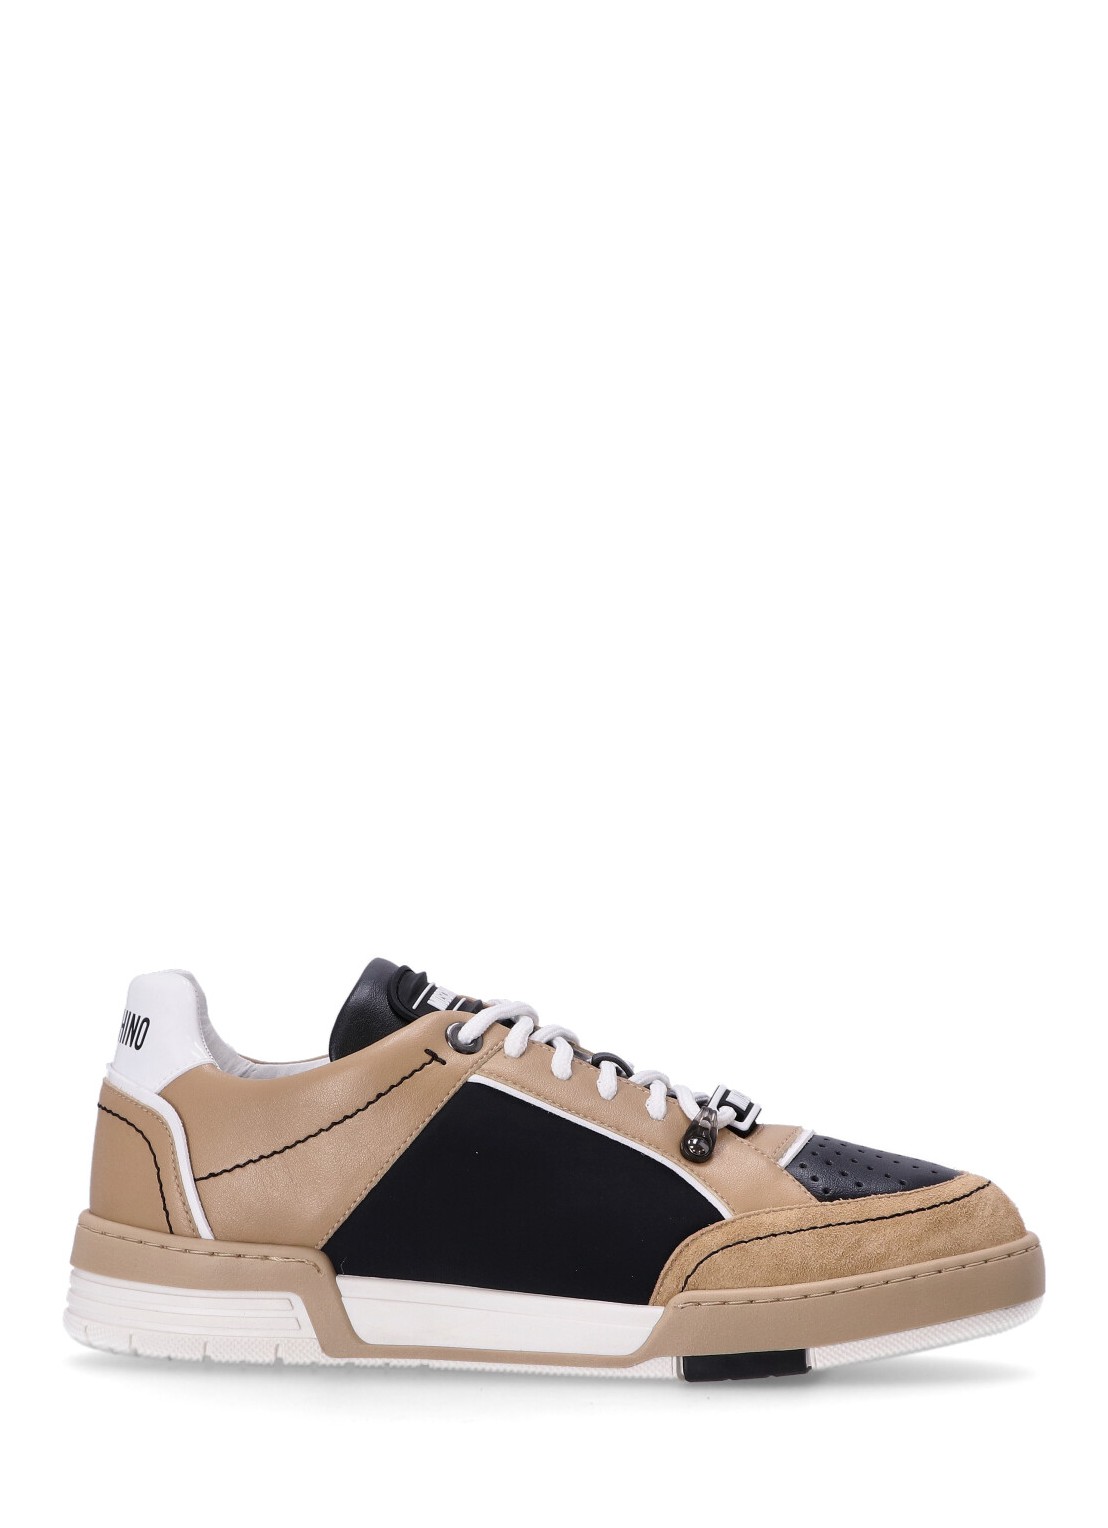 Sneaker moschino couture sneaker man m.sneakers mb15614g1igna 00a talla 43
 